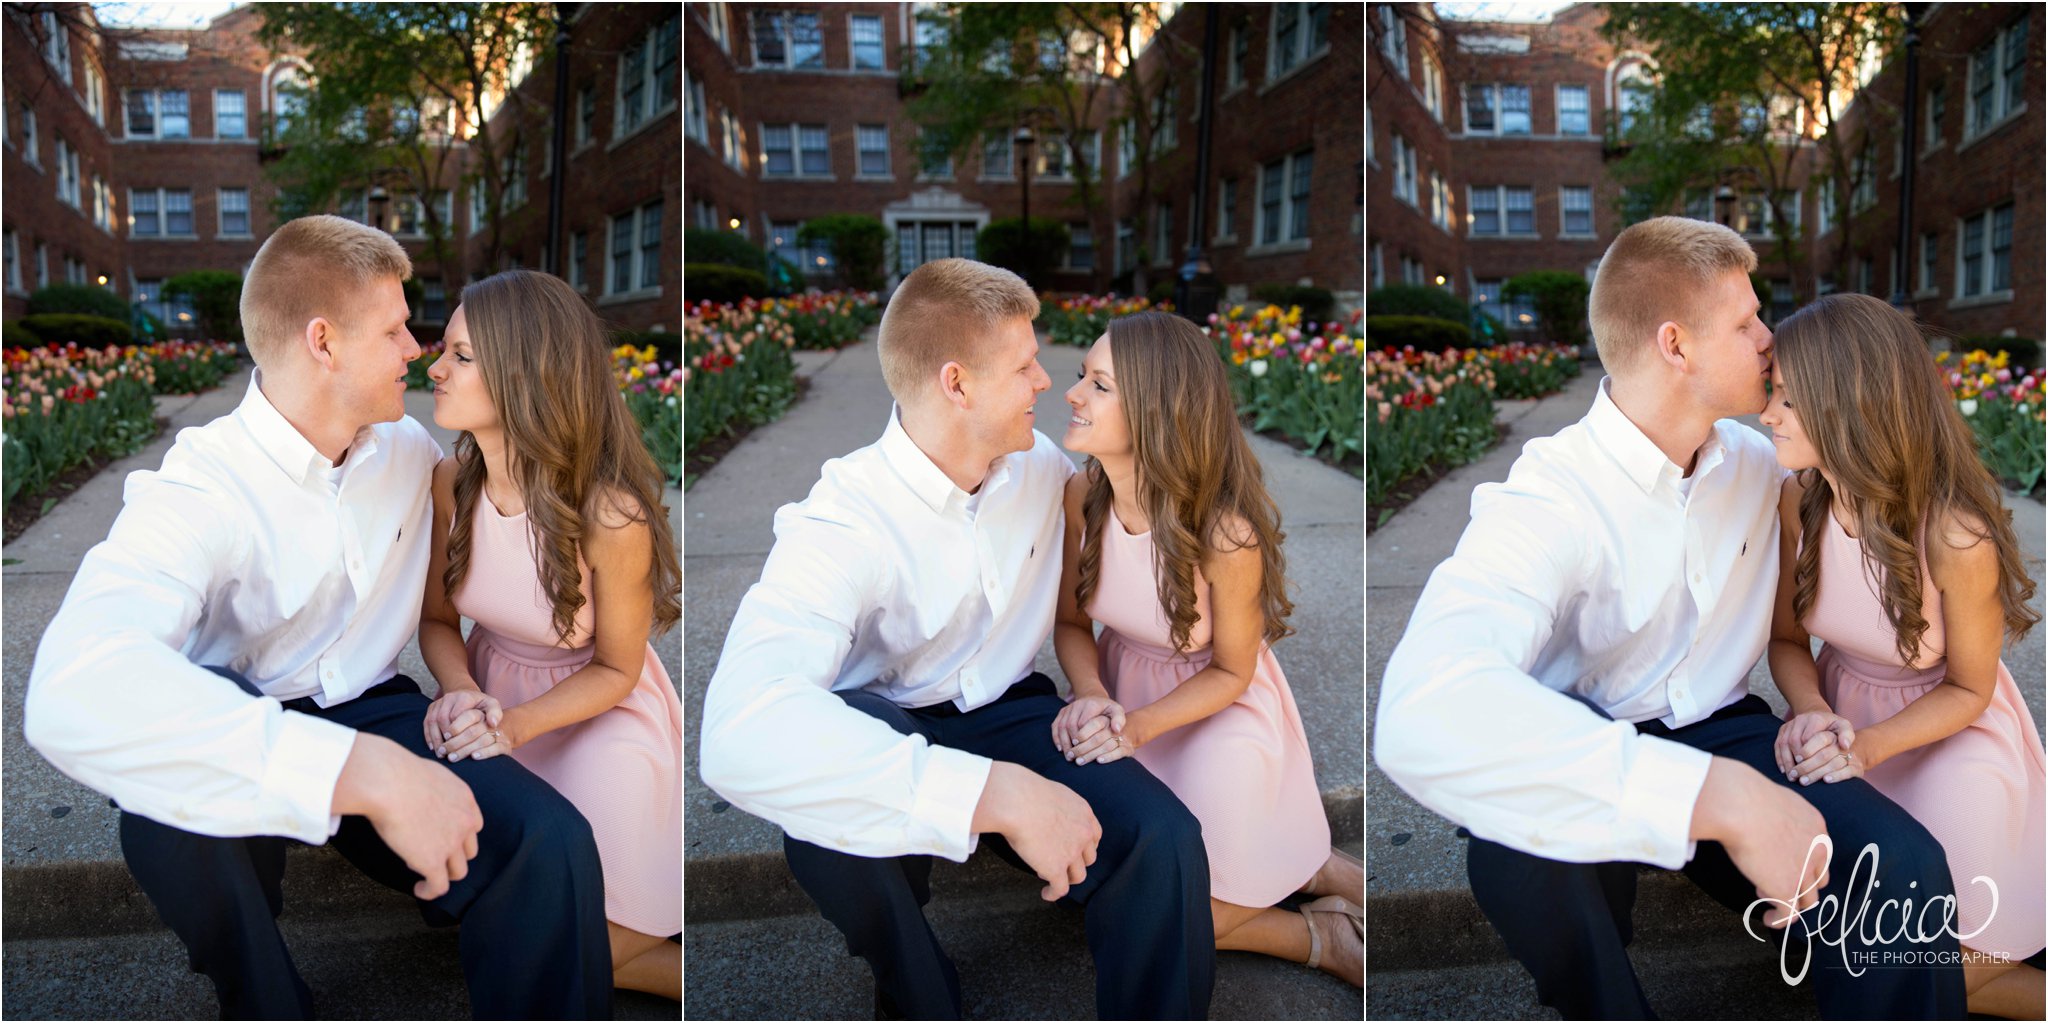 KC Romantic Engagement Photographer | Seated with Tulips | Images by www.feliciathephotographer.com